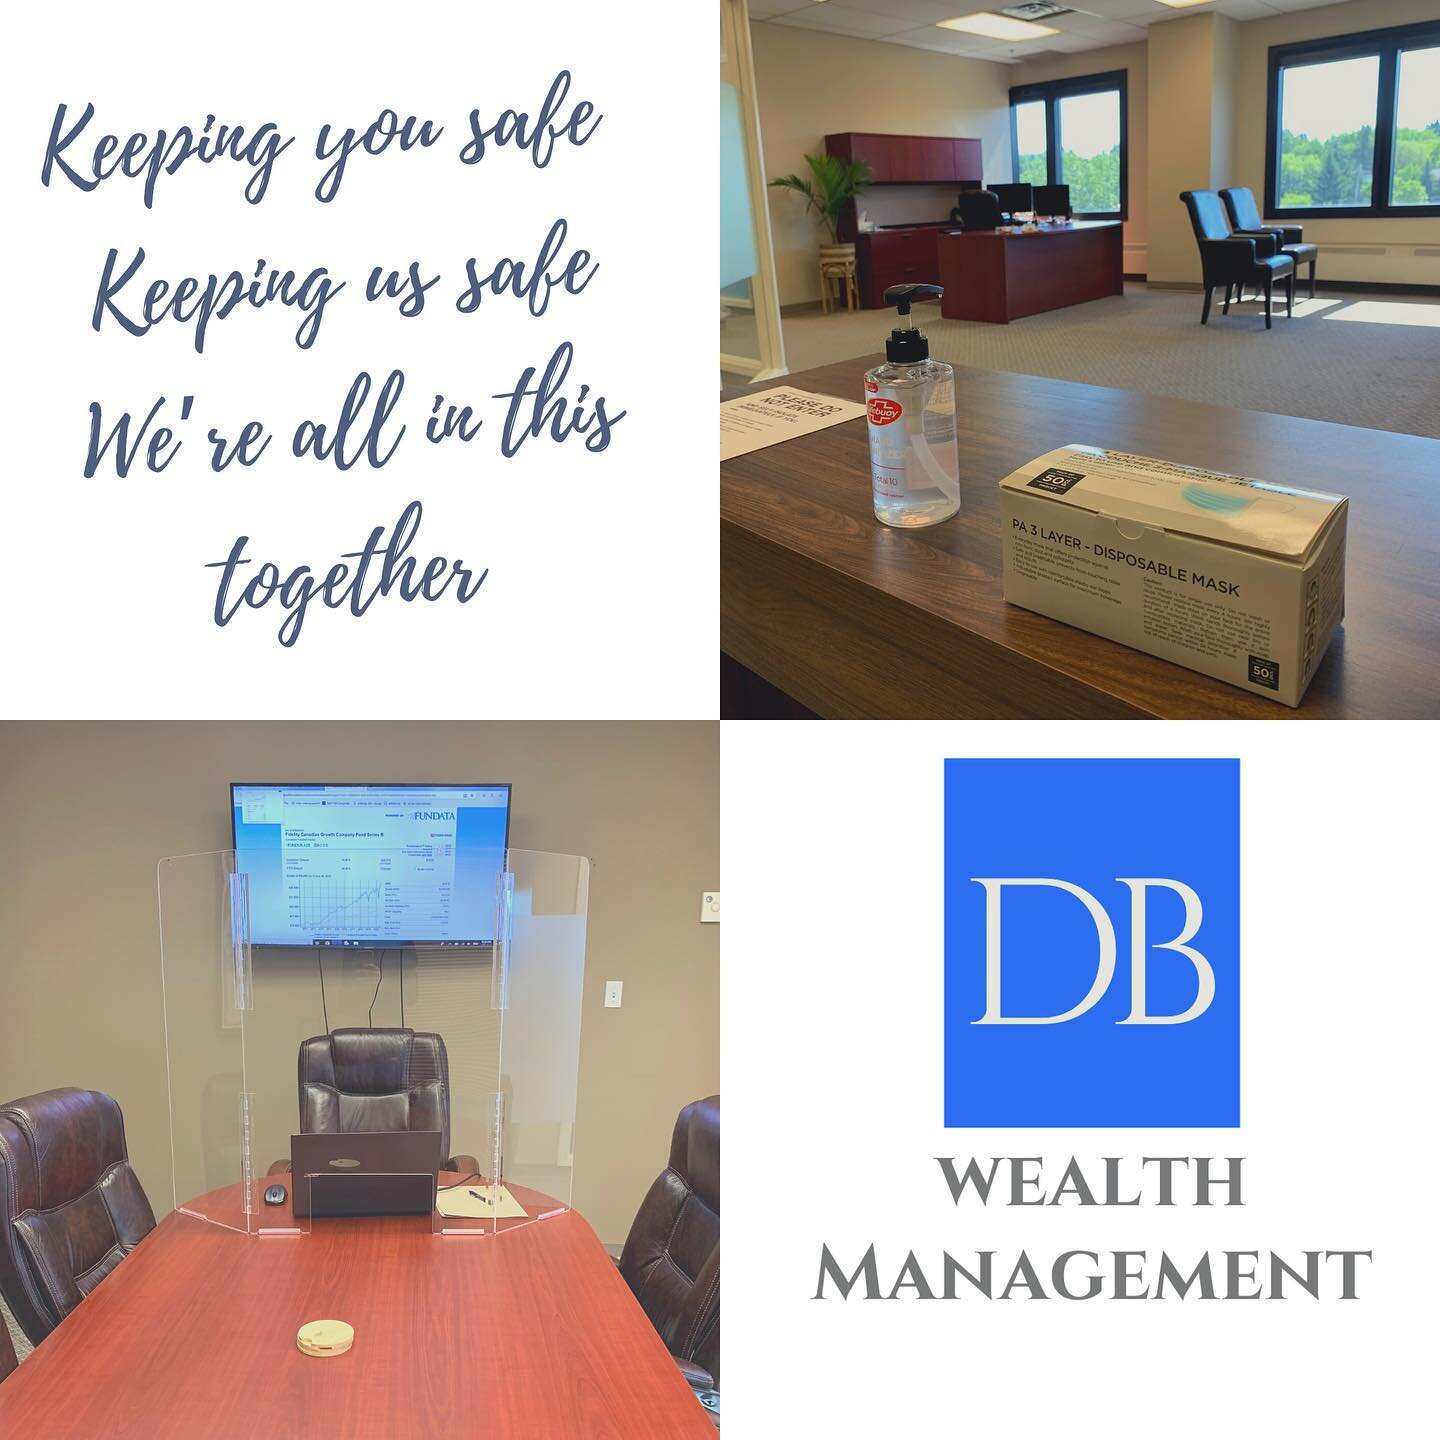 Doing our part to keep you safe and keep us safe. Masks and sanitizer are available to our clients upon entry. As well as, plexiglass partitions and personal distancing during appointments in our boardroom. We are also happy to offer video conferenci